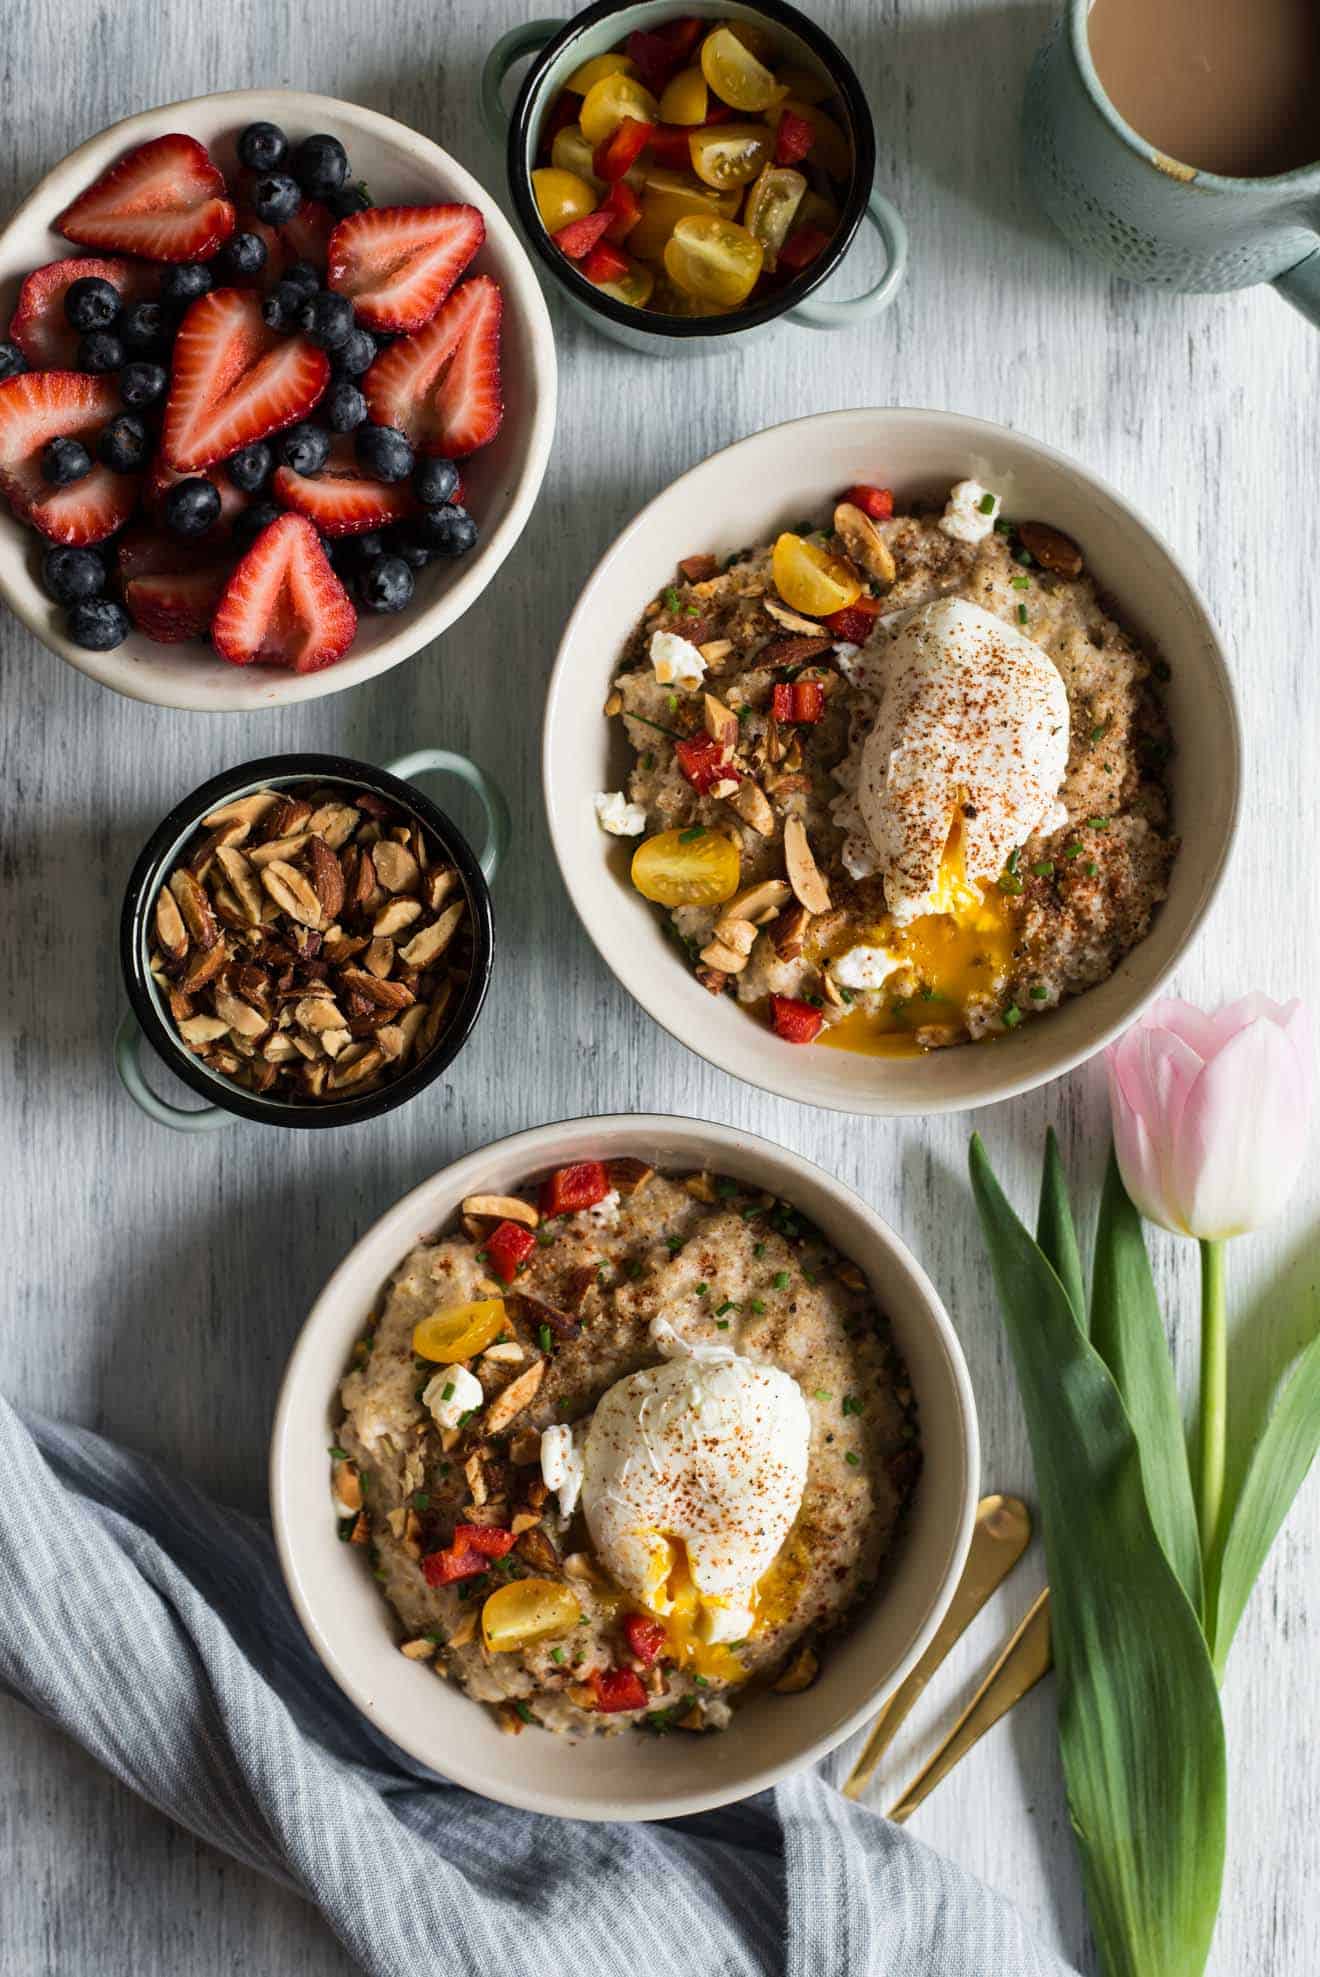 Savory Oatmeal with Poached Egg and Roasted Almonds - easy, filling and healthy breakfast to jump-start your day. 